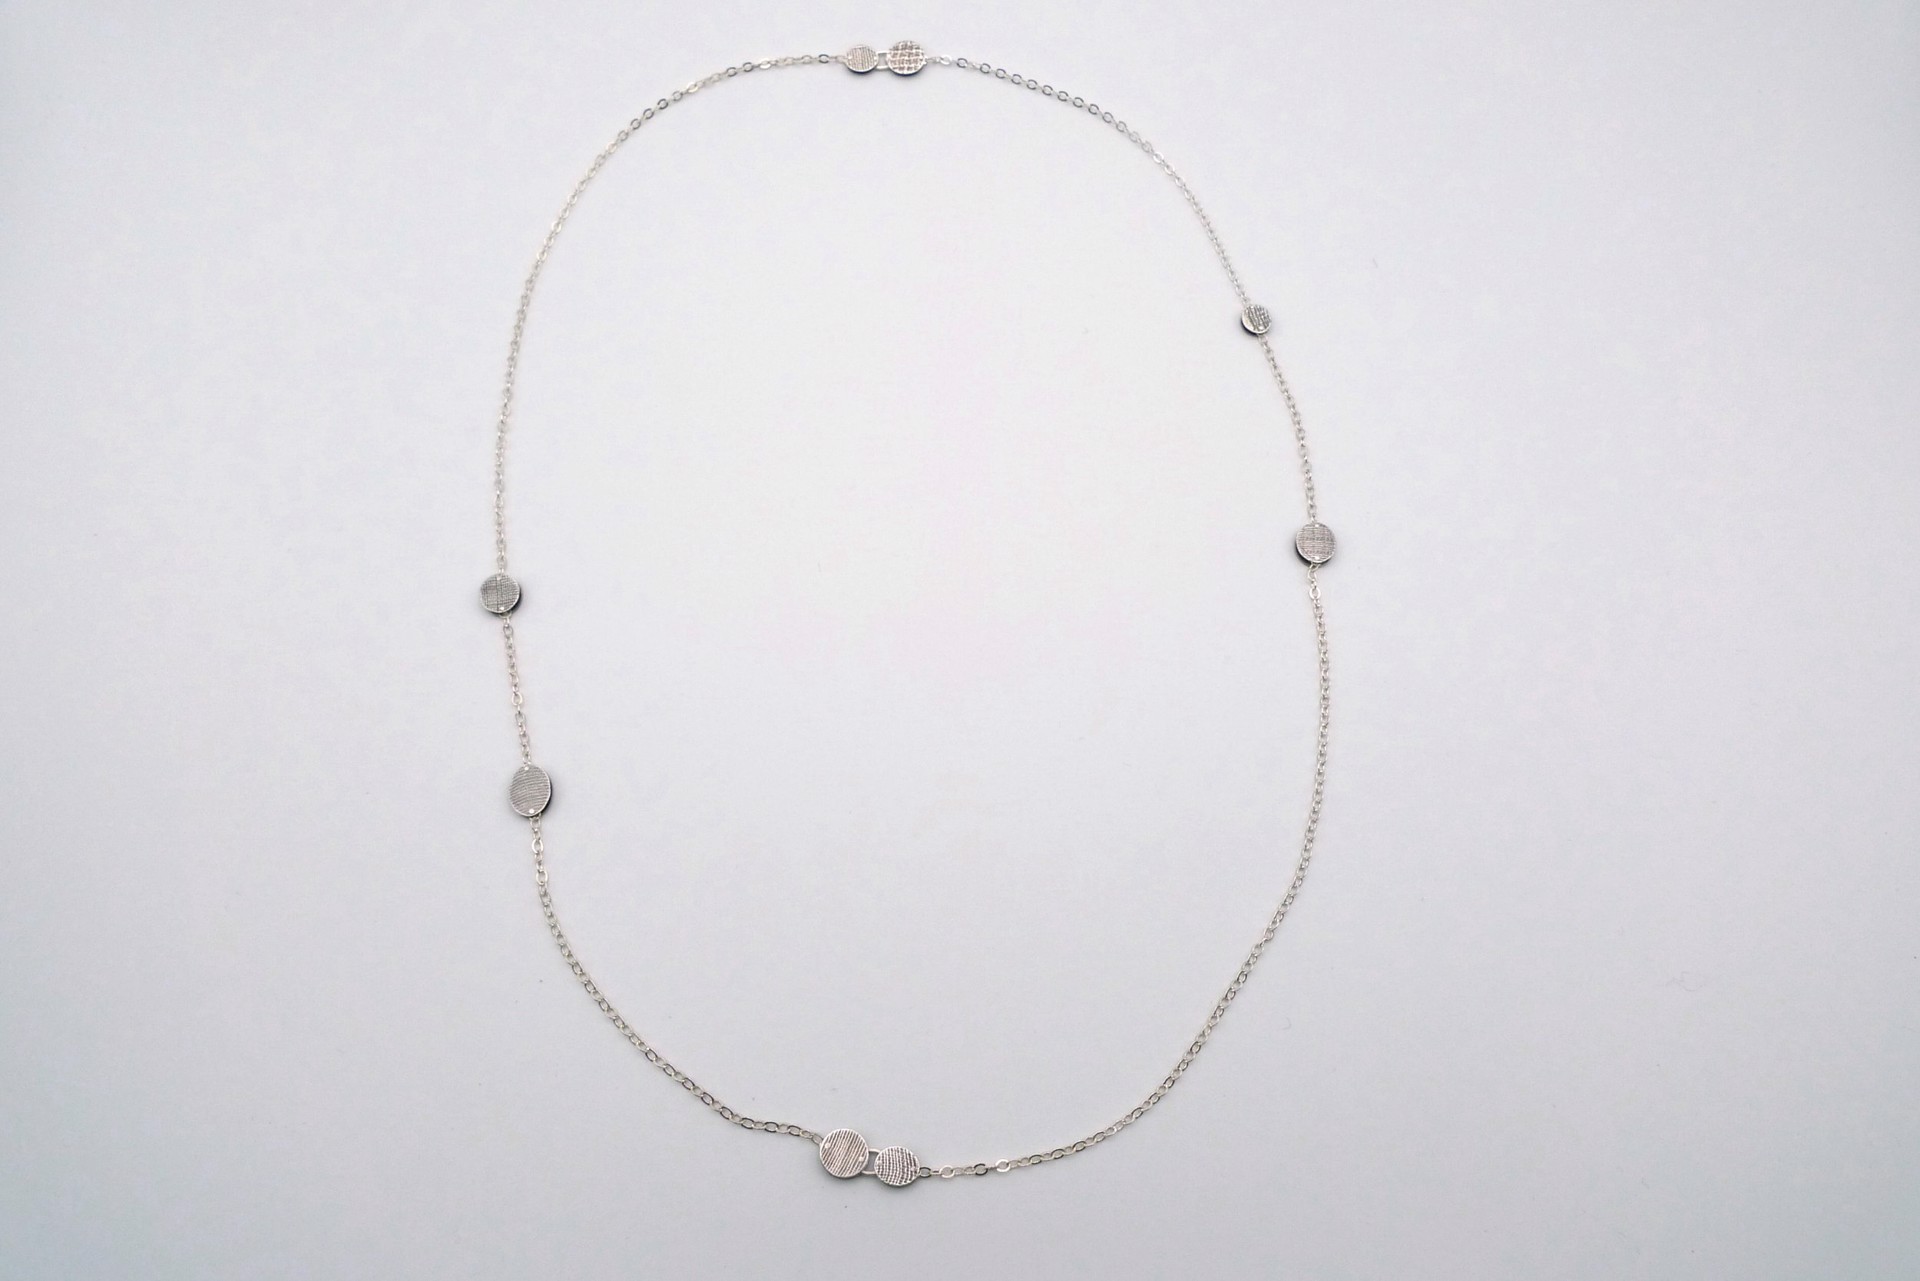 Long Sterling Silver Necklace by Erica Schlueter